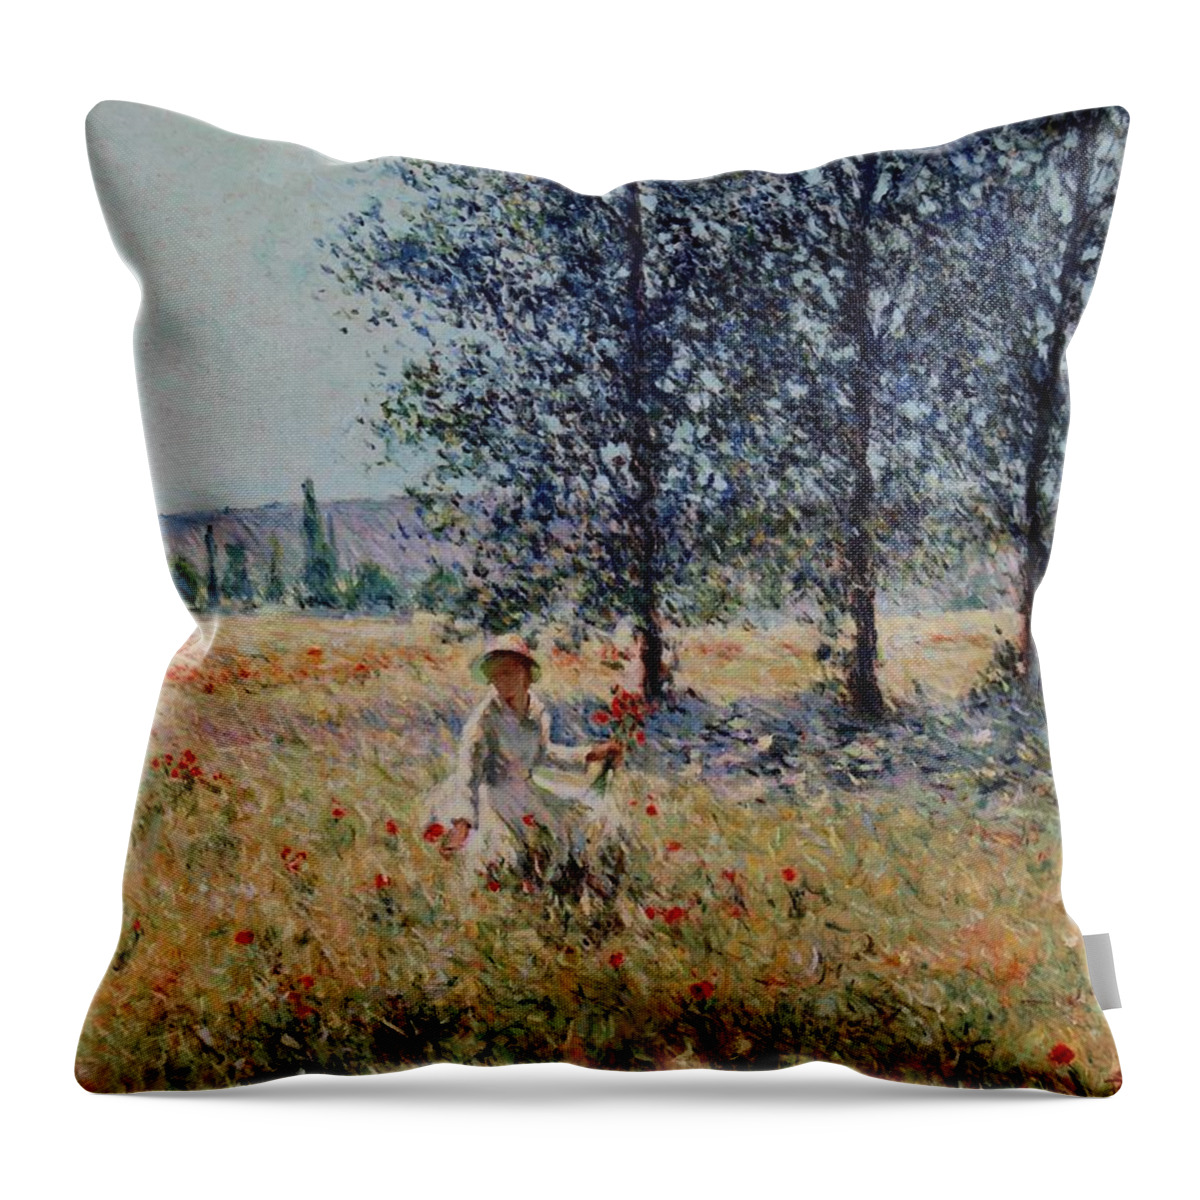 Art Pierre Throw Pillow featuring the painting Picking flowers by Pierre Dijk